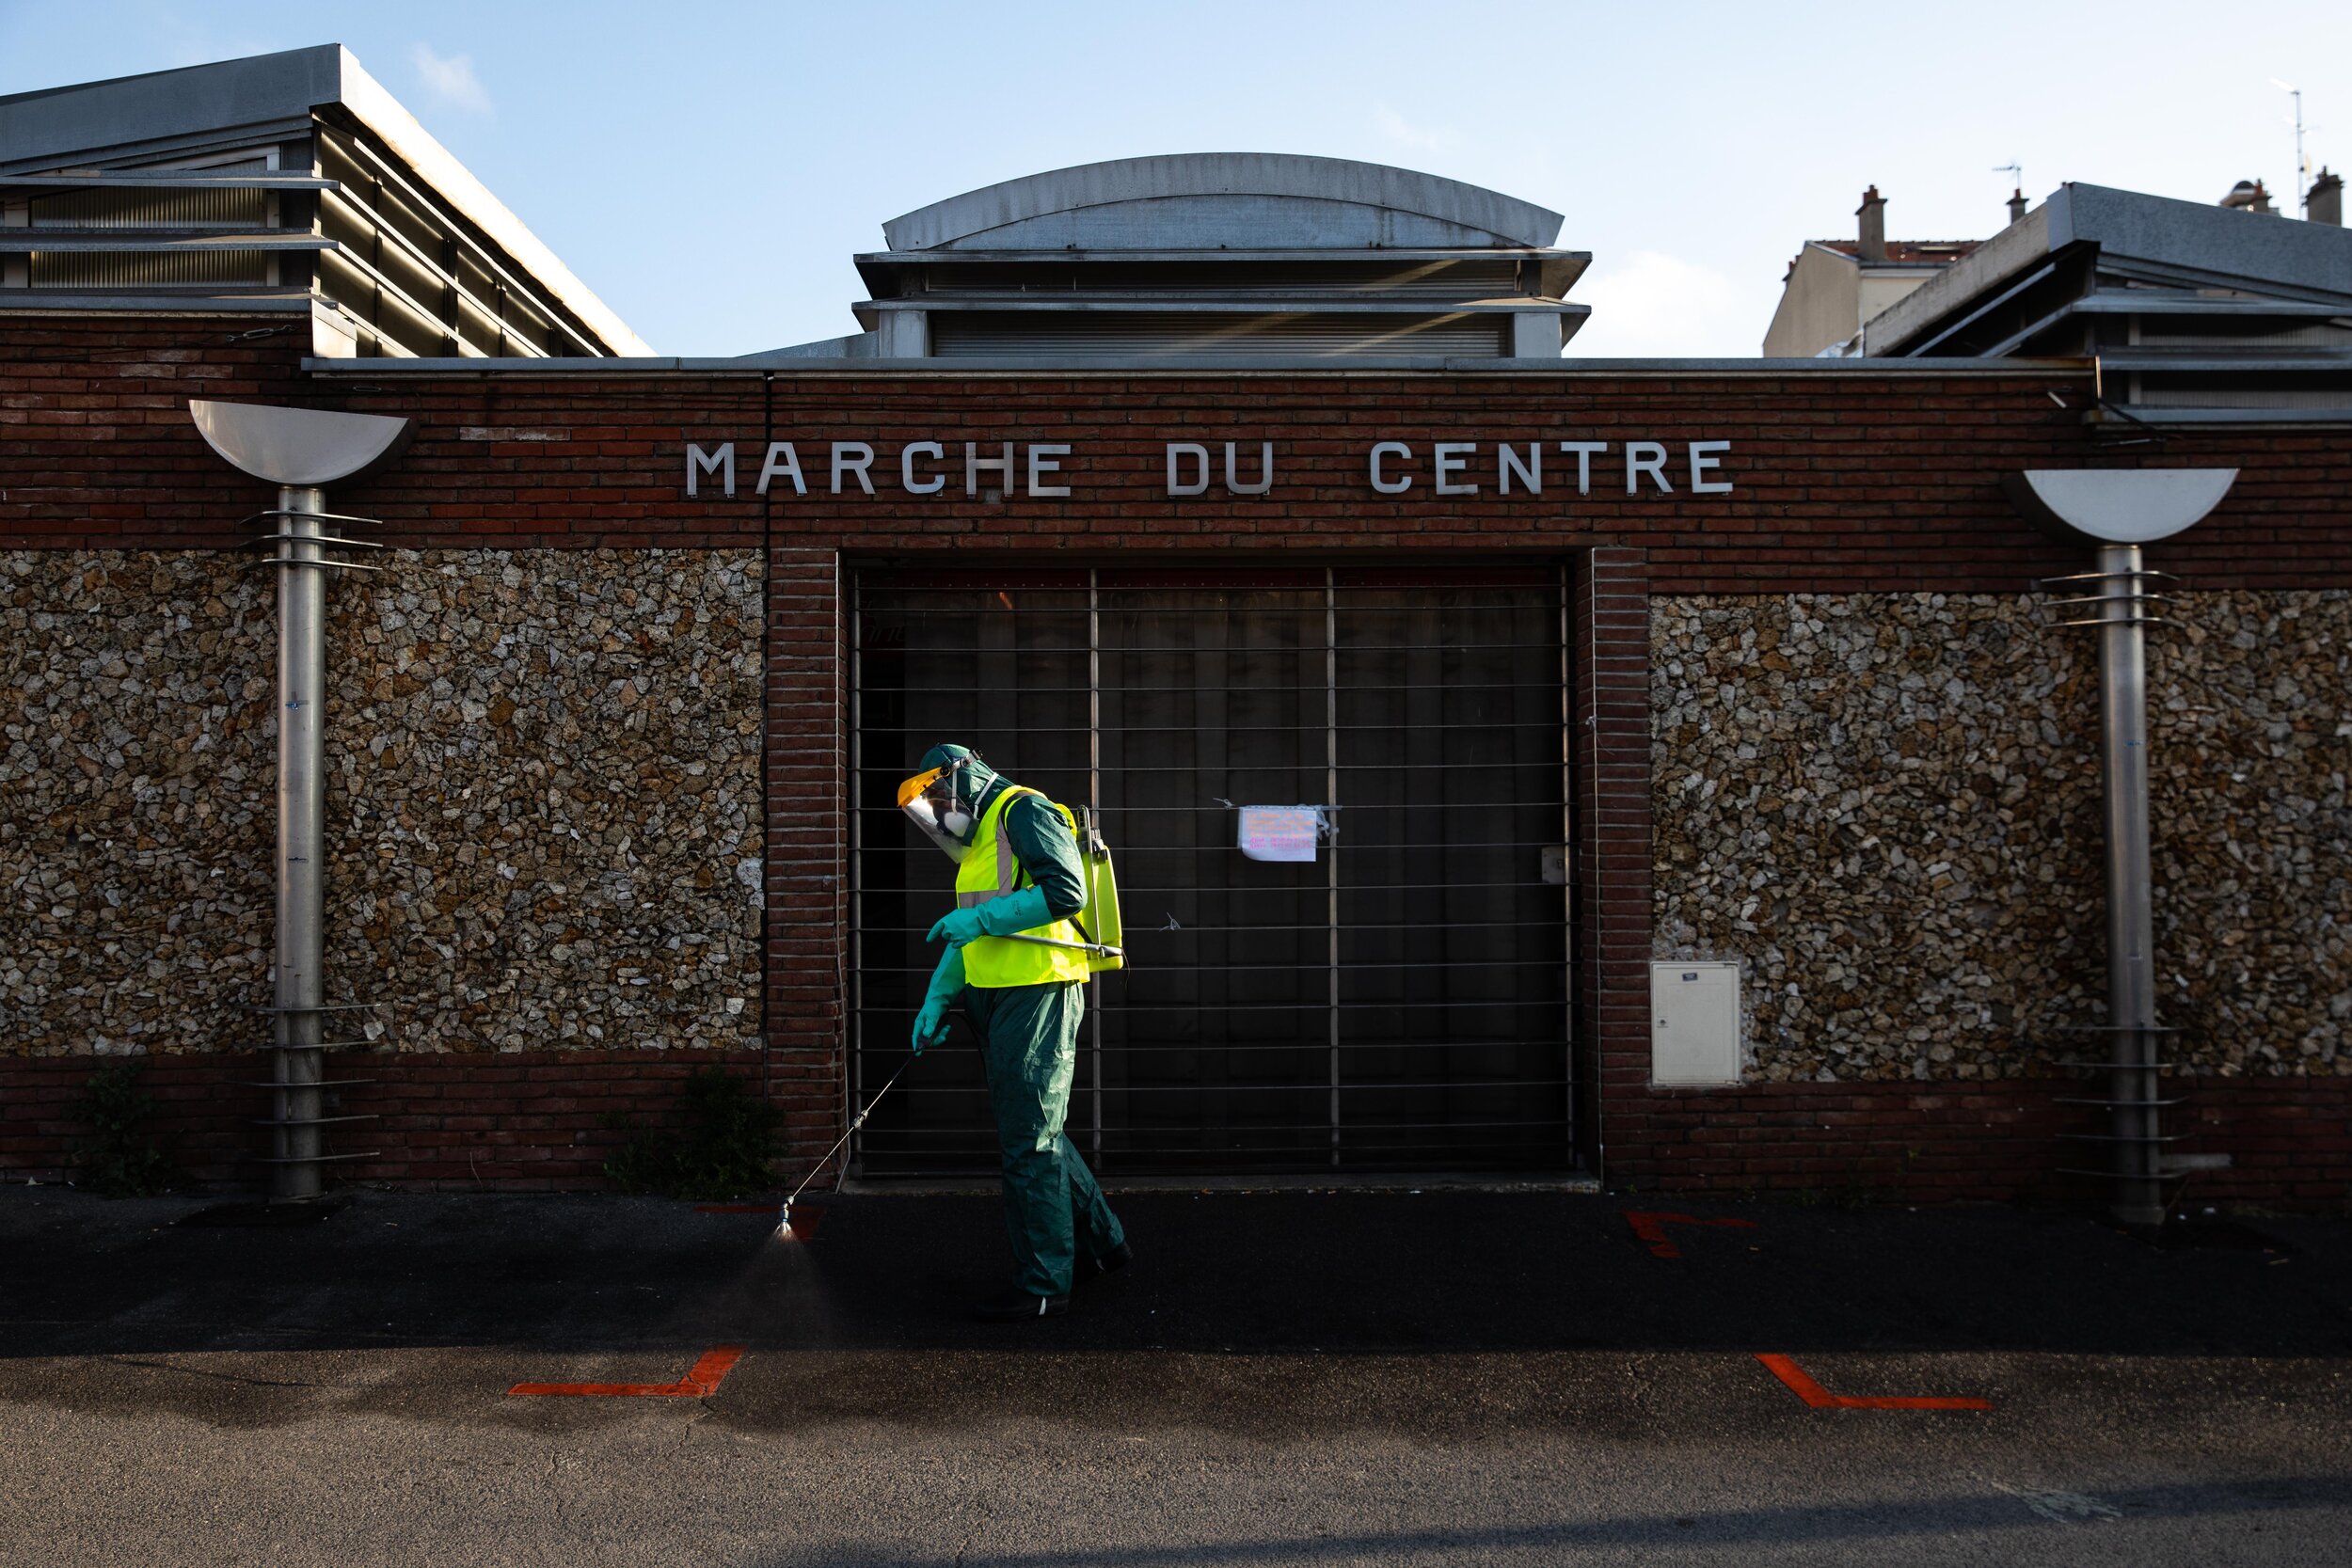   © Alexis Sciard / IP3; Neuilly Plaisance, France, March 31, 2020  - Man as he desinfects certain areas of the city centre with a chlorine solution in an attempt to stop the spread of the Coronavirus.  